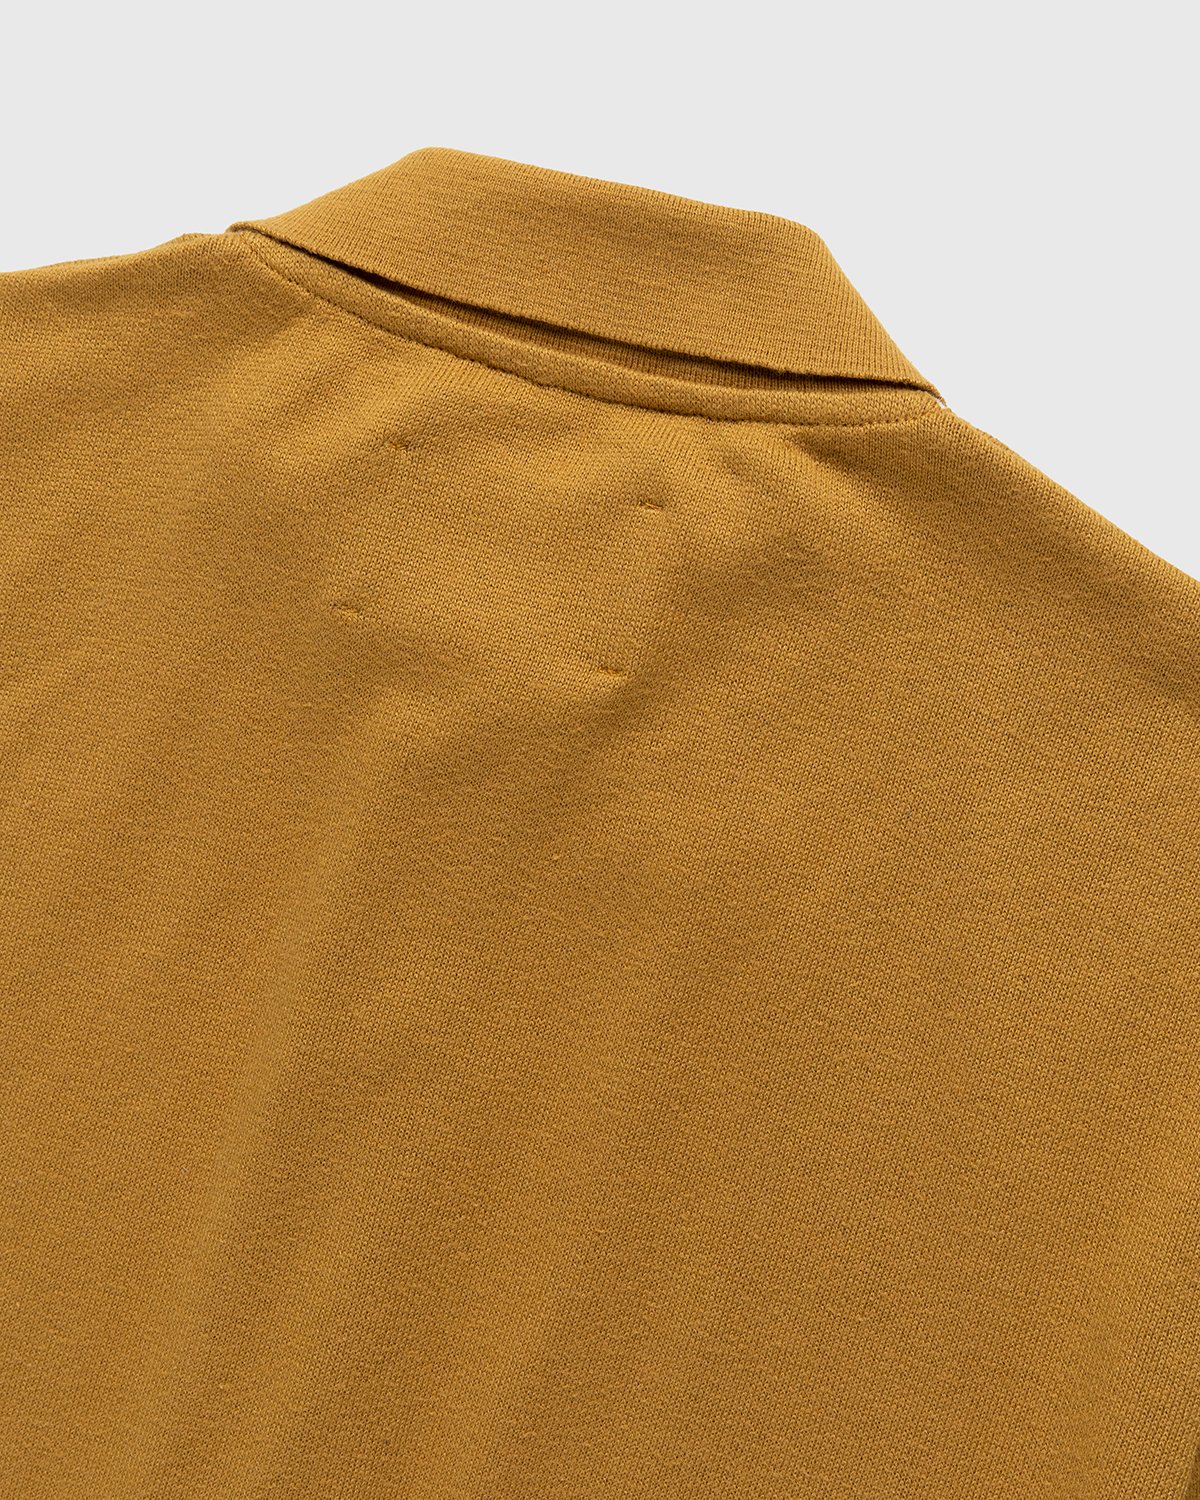 Highsnobiety - Knit Bowling Shirt Beige Brown - Clothing - Brown - Image 4